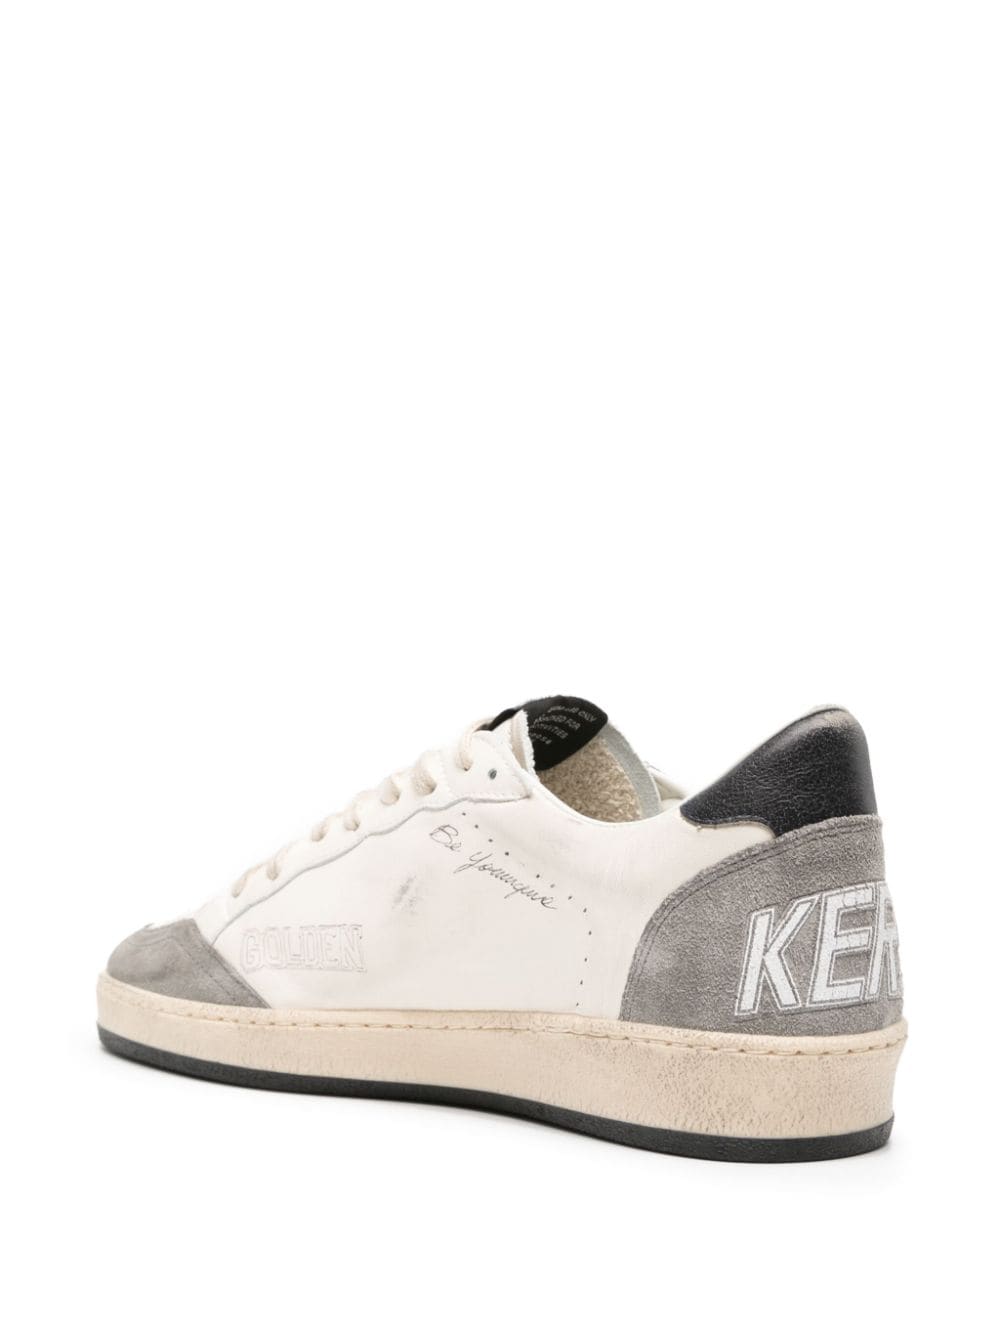 GOLDEN GOOSE Men's Vintage White Ball-Star Sneakers with Grey Suede Inserts